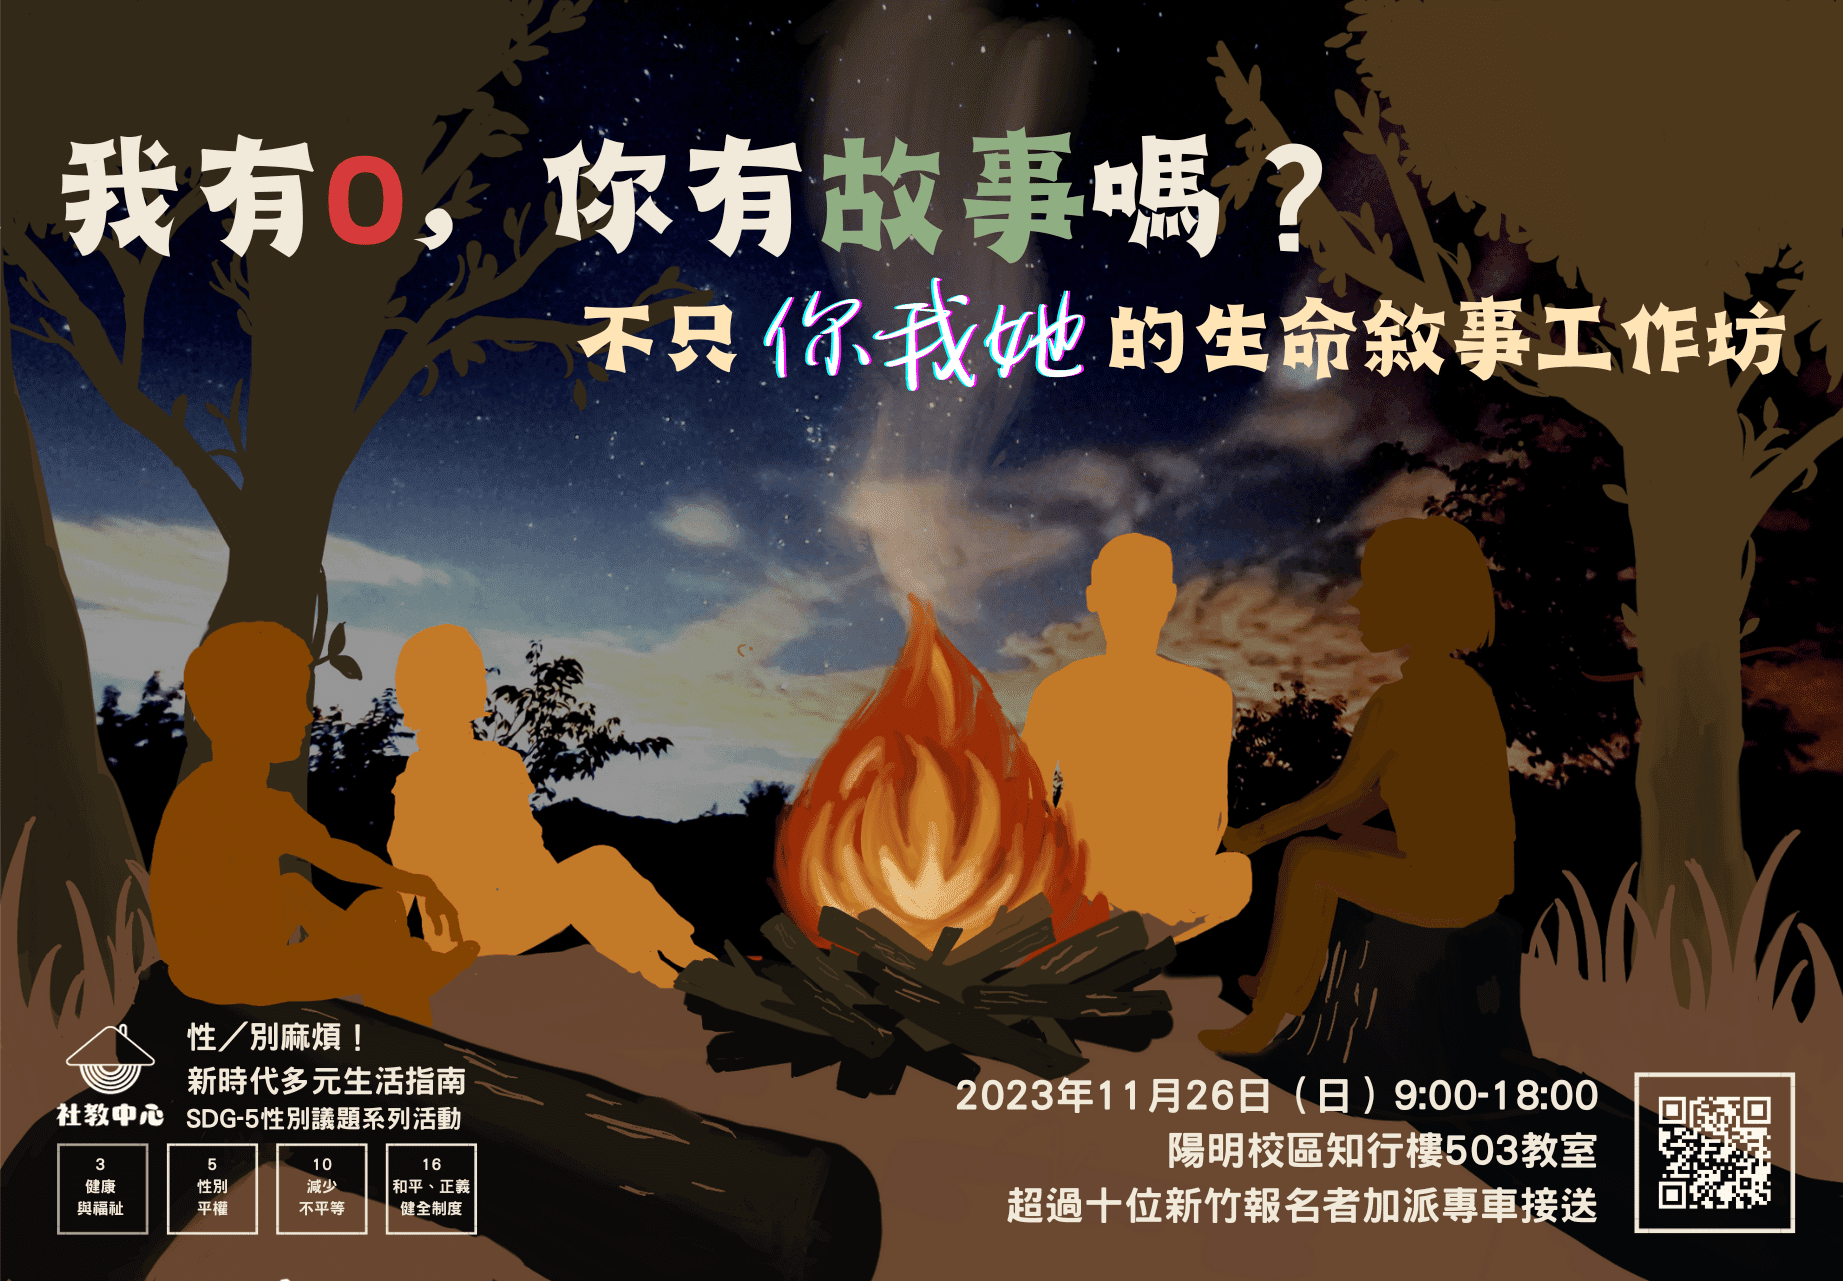 【 “I Have __, Do You Have a Story?” Life Narrative Workshop: Not Just About Us | SDG-5 Gender Issues Series Event-2 | LACCPEC】